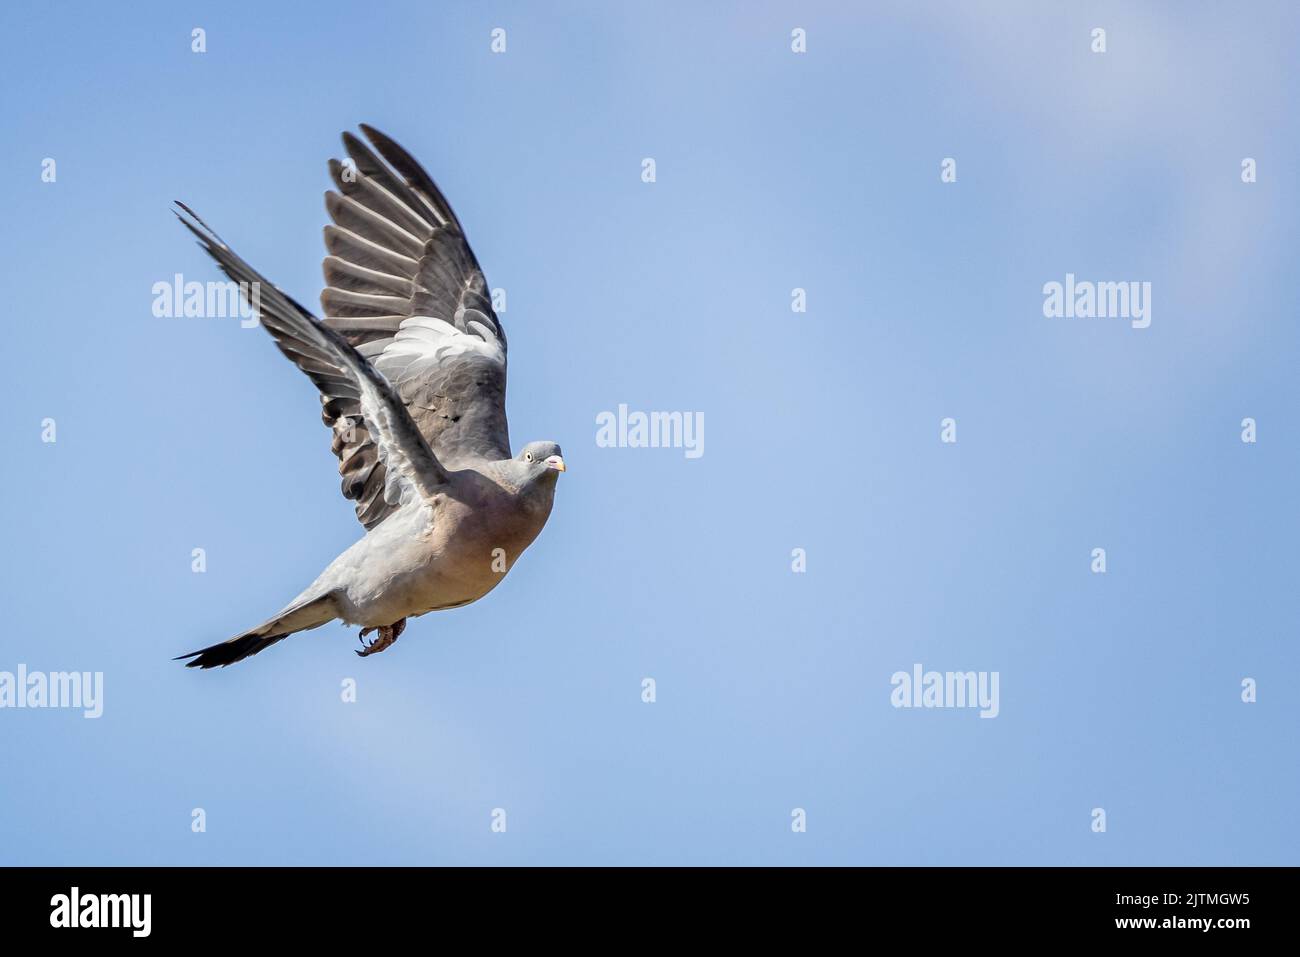 Close up of a pigeon in flight having just taken off Stock Photo